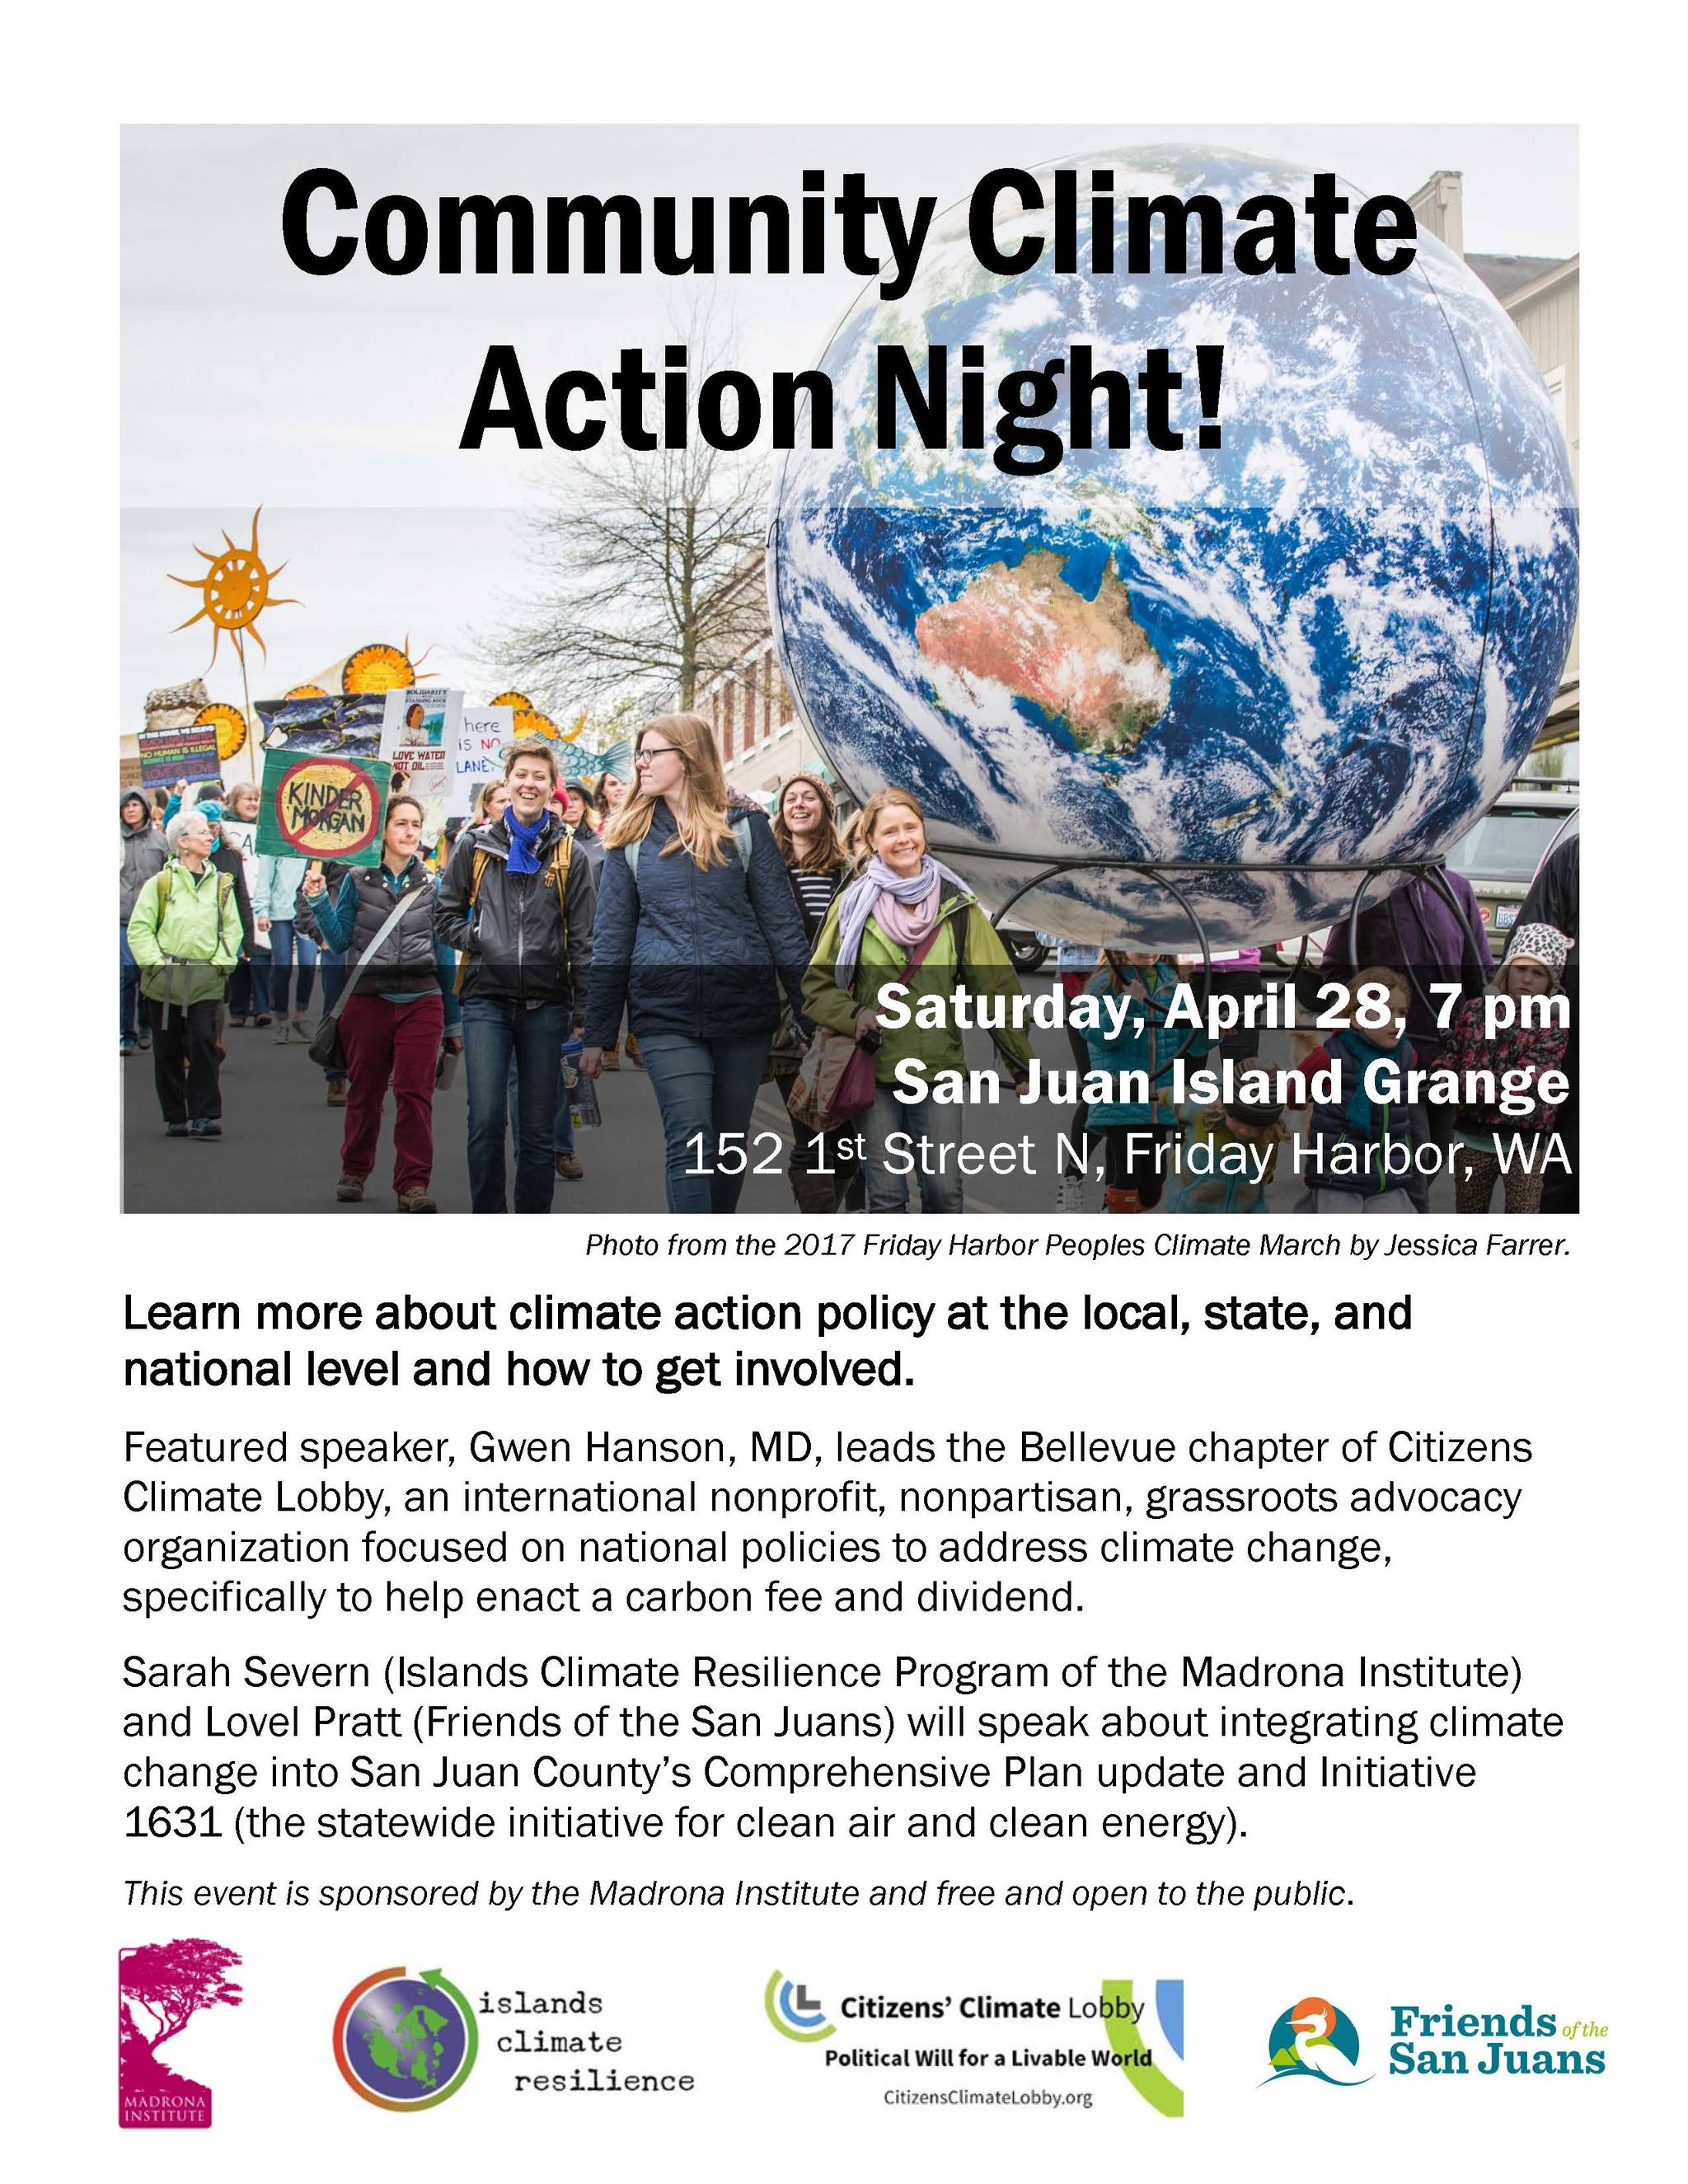 Climate action policy event at San Juan Island Grange